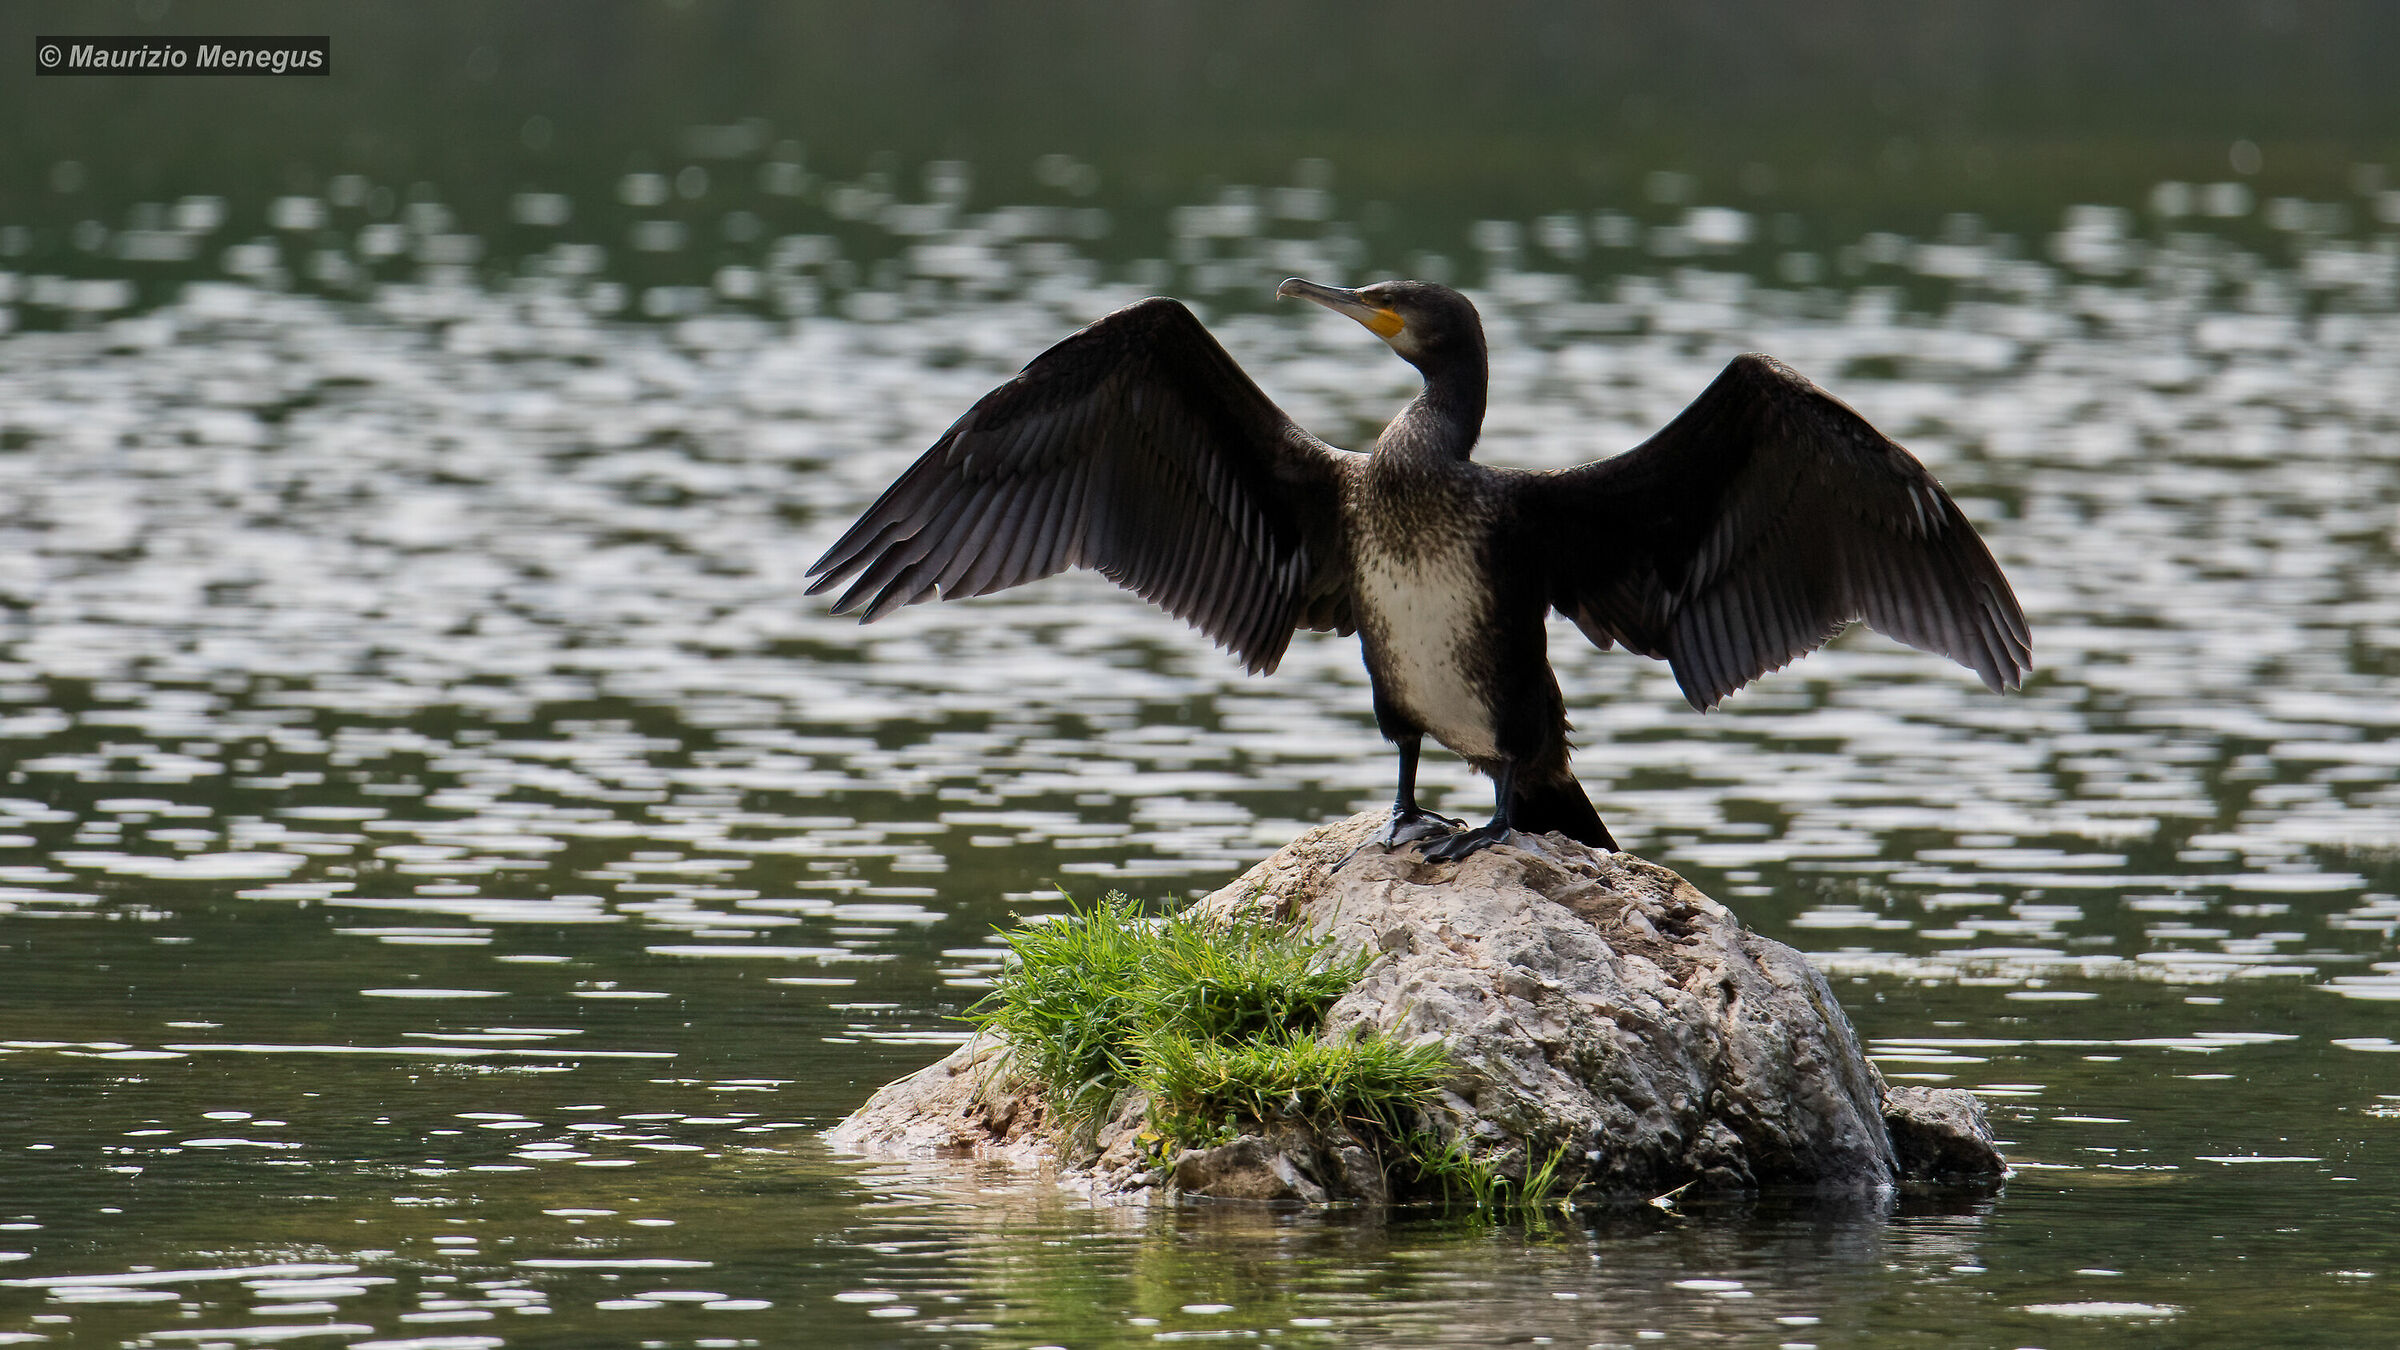 The wingspan of the cormorant...